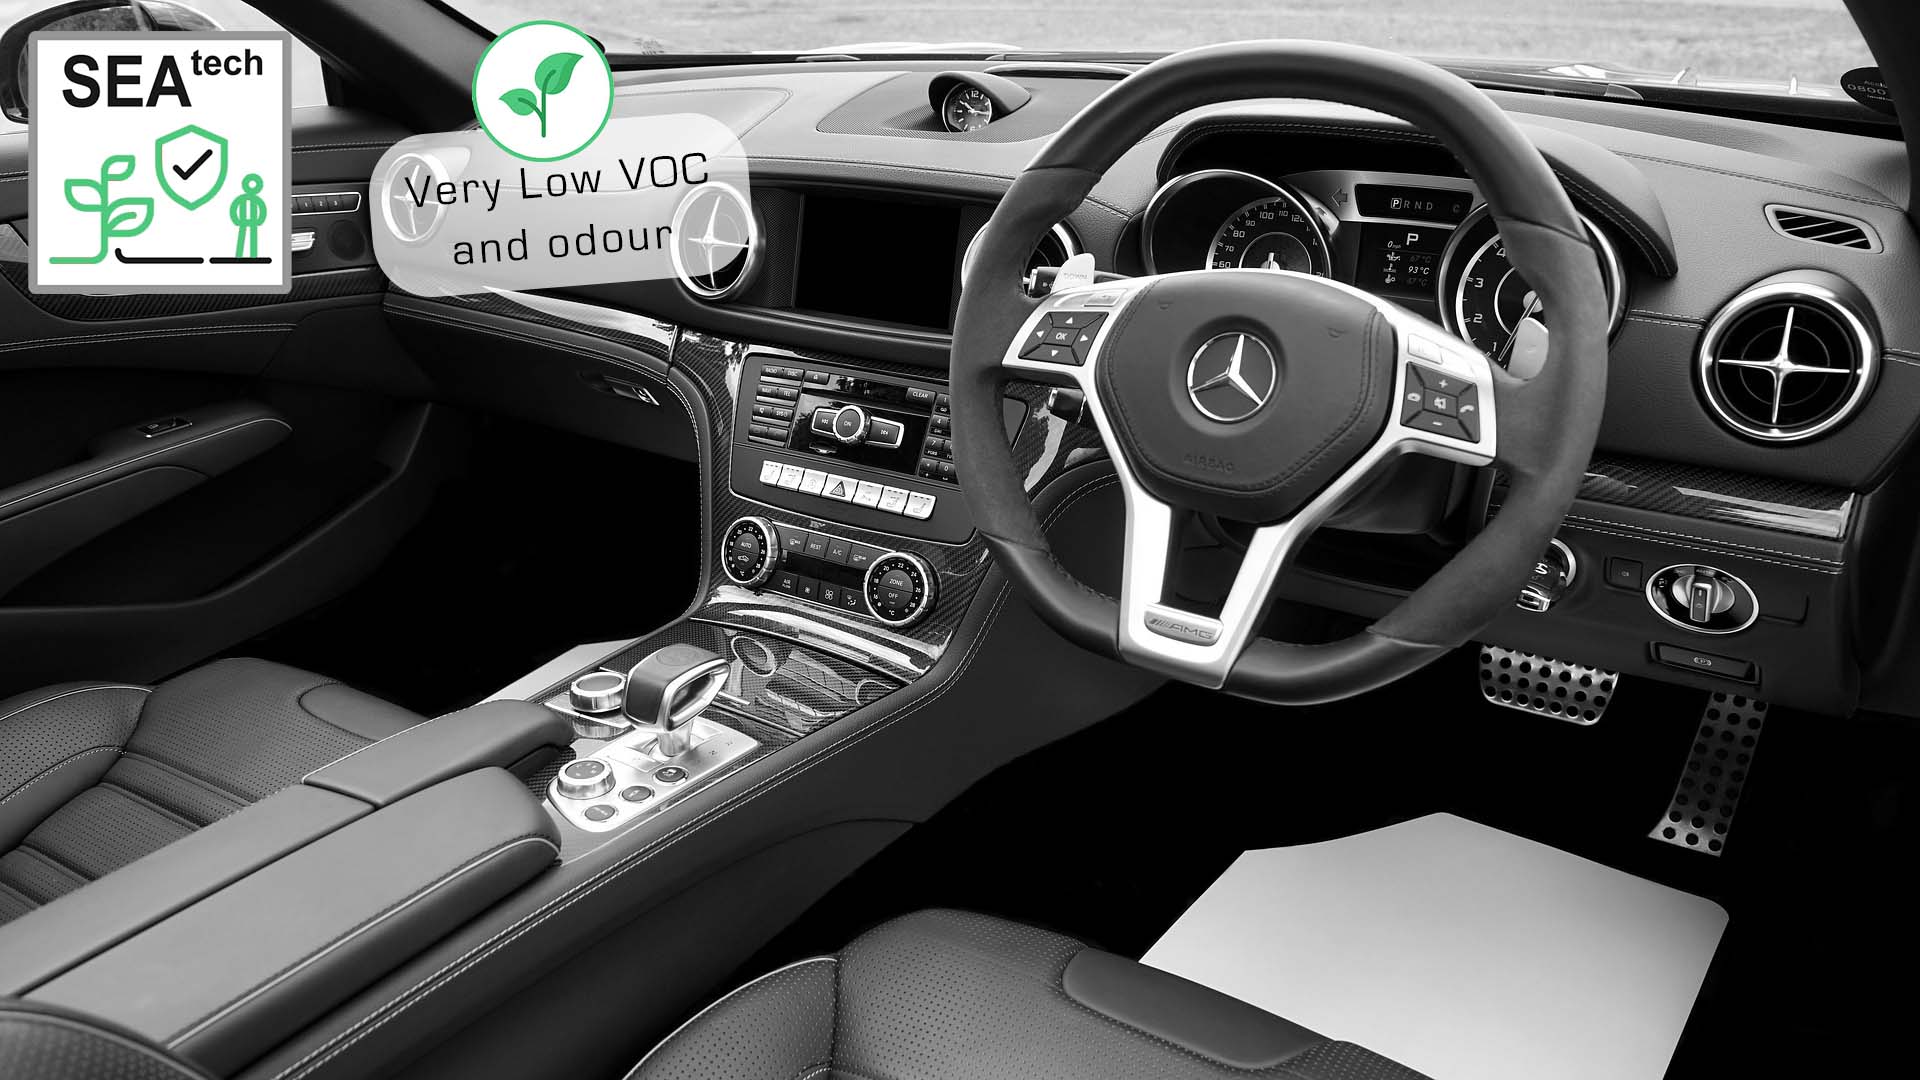 LOW VOC ADHESIVE TAPES FOR AUTOMOTIVE VEHICLES INTERIOR